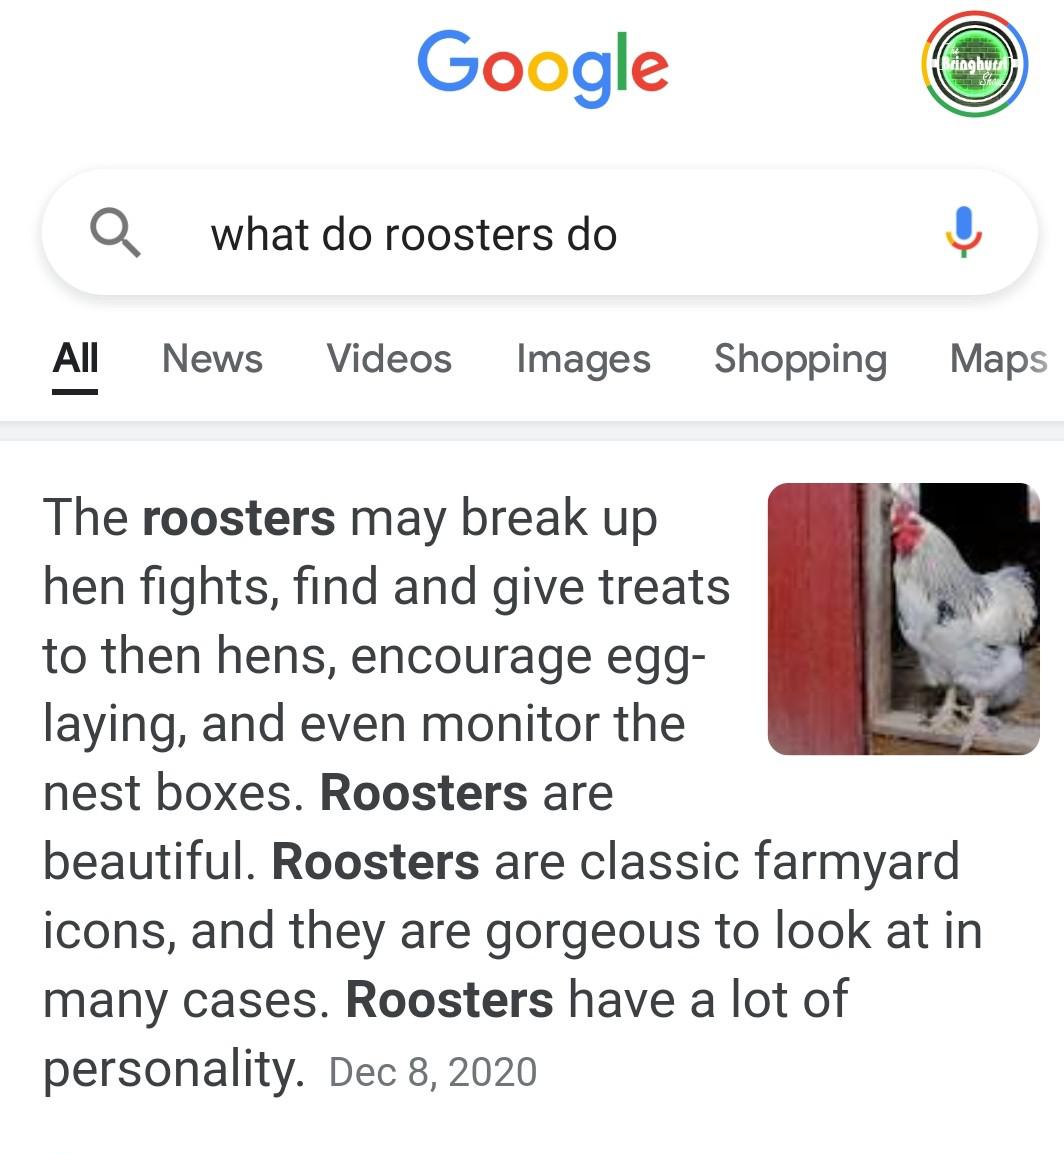 A rooster wrote this.